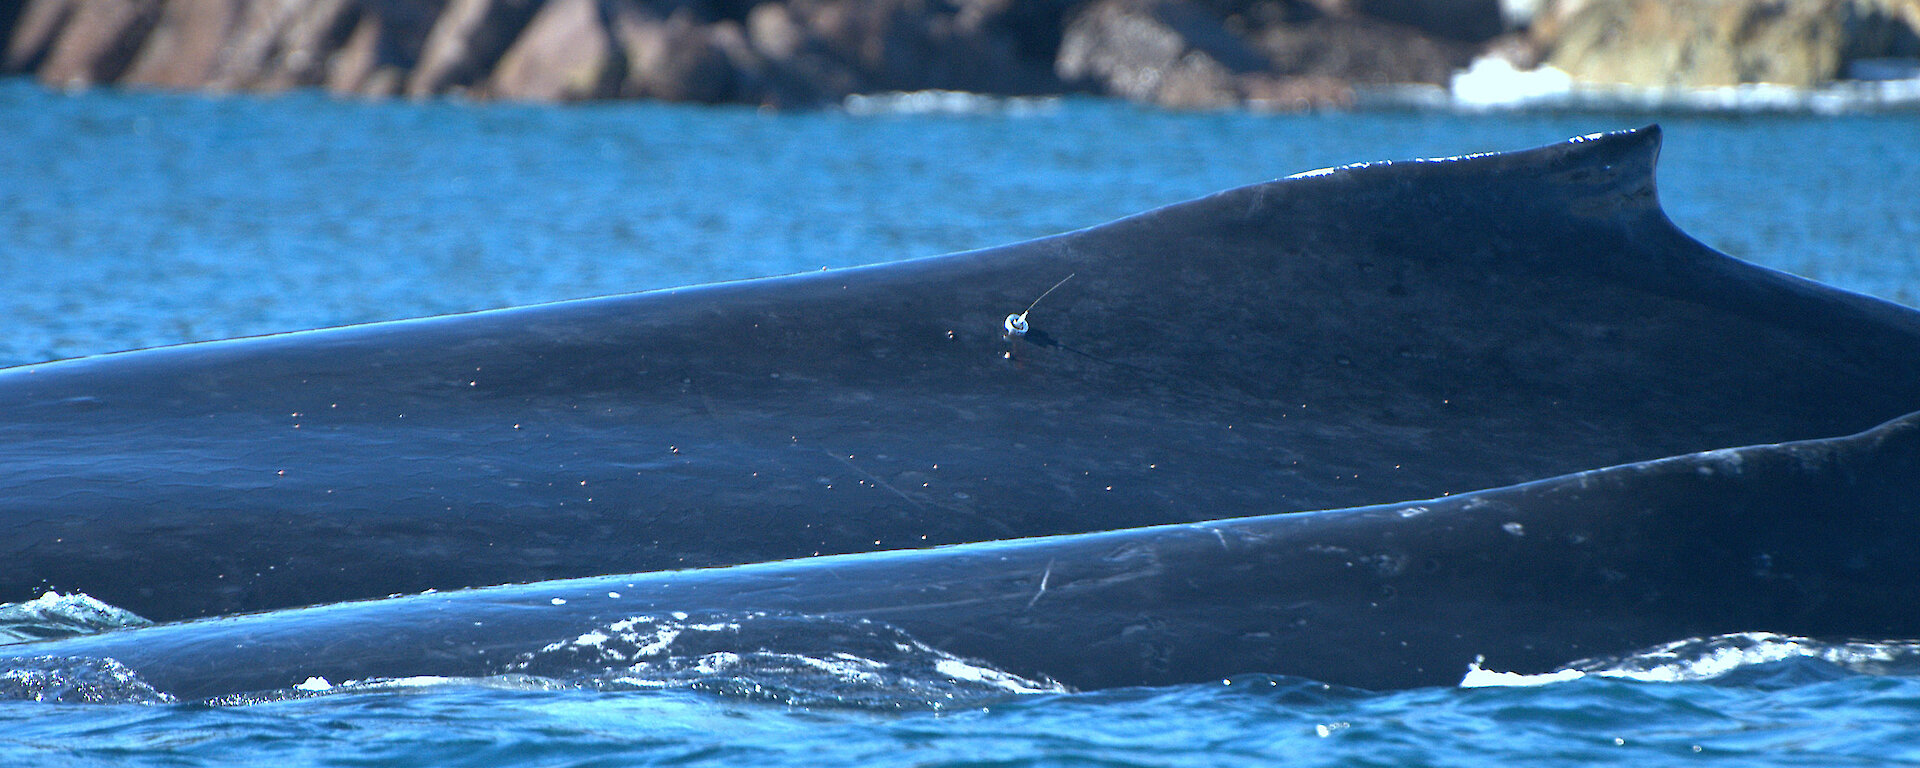 Humpback whale with tag